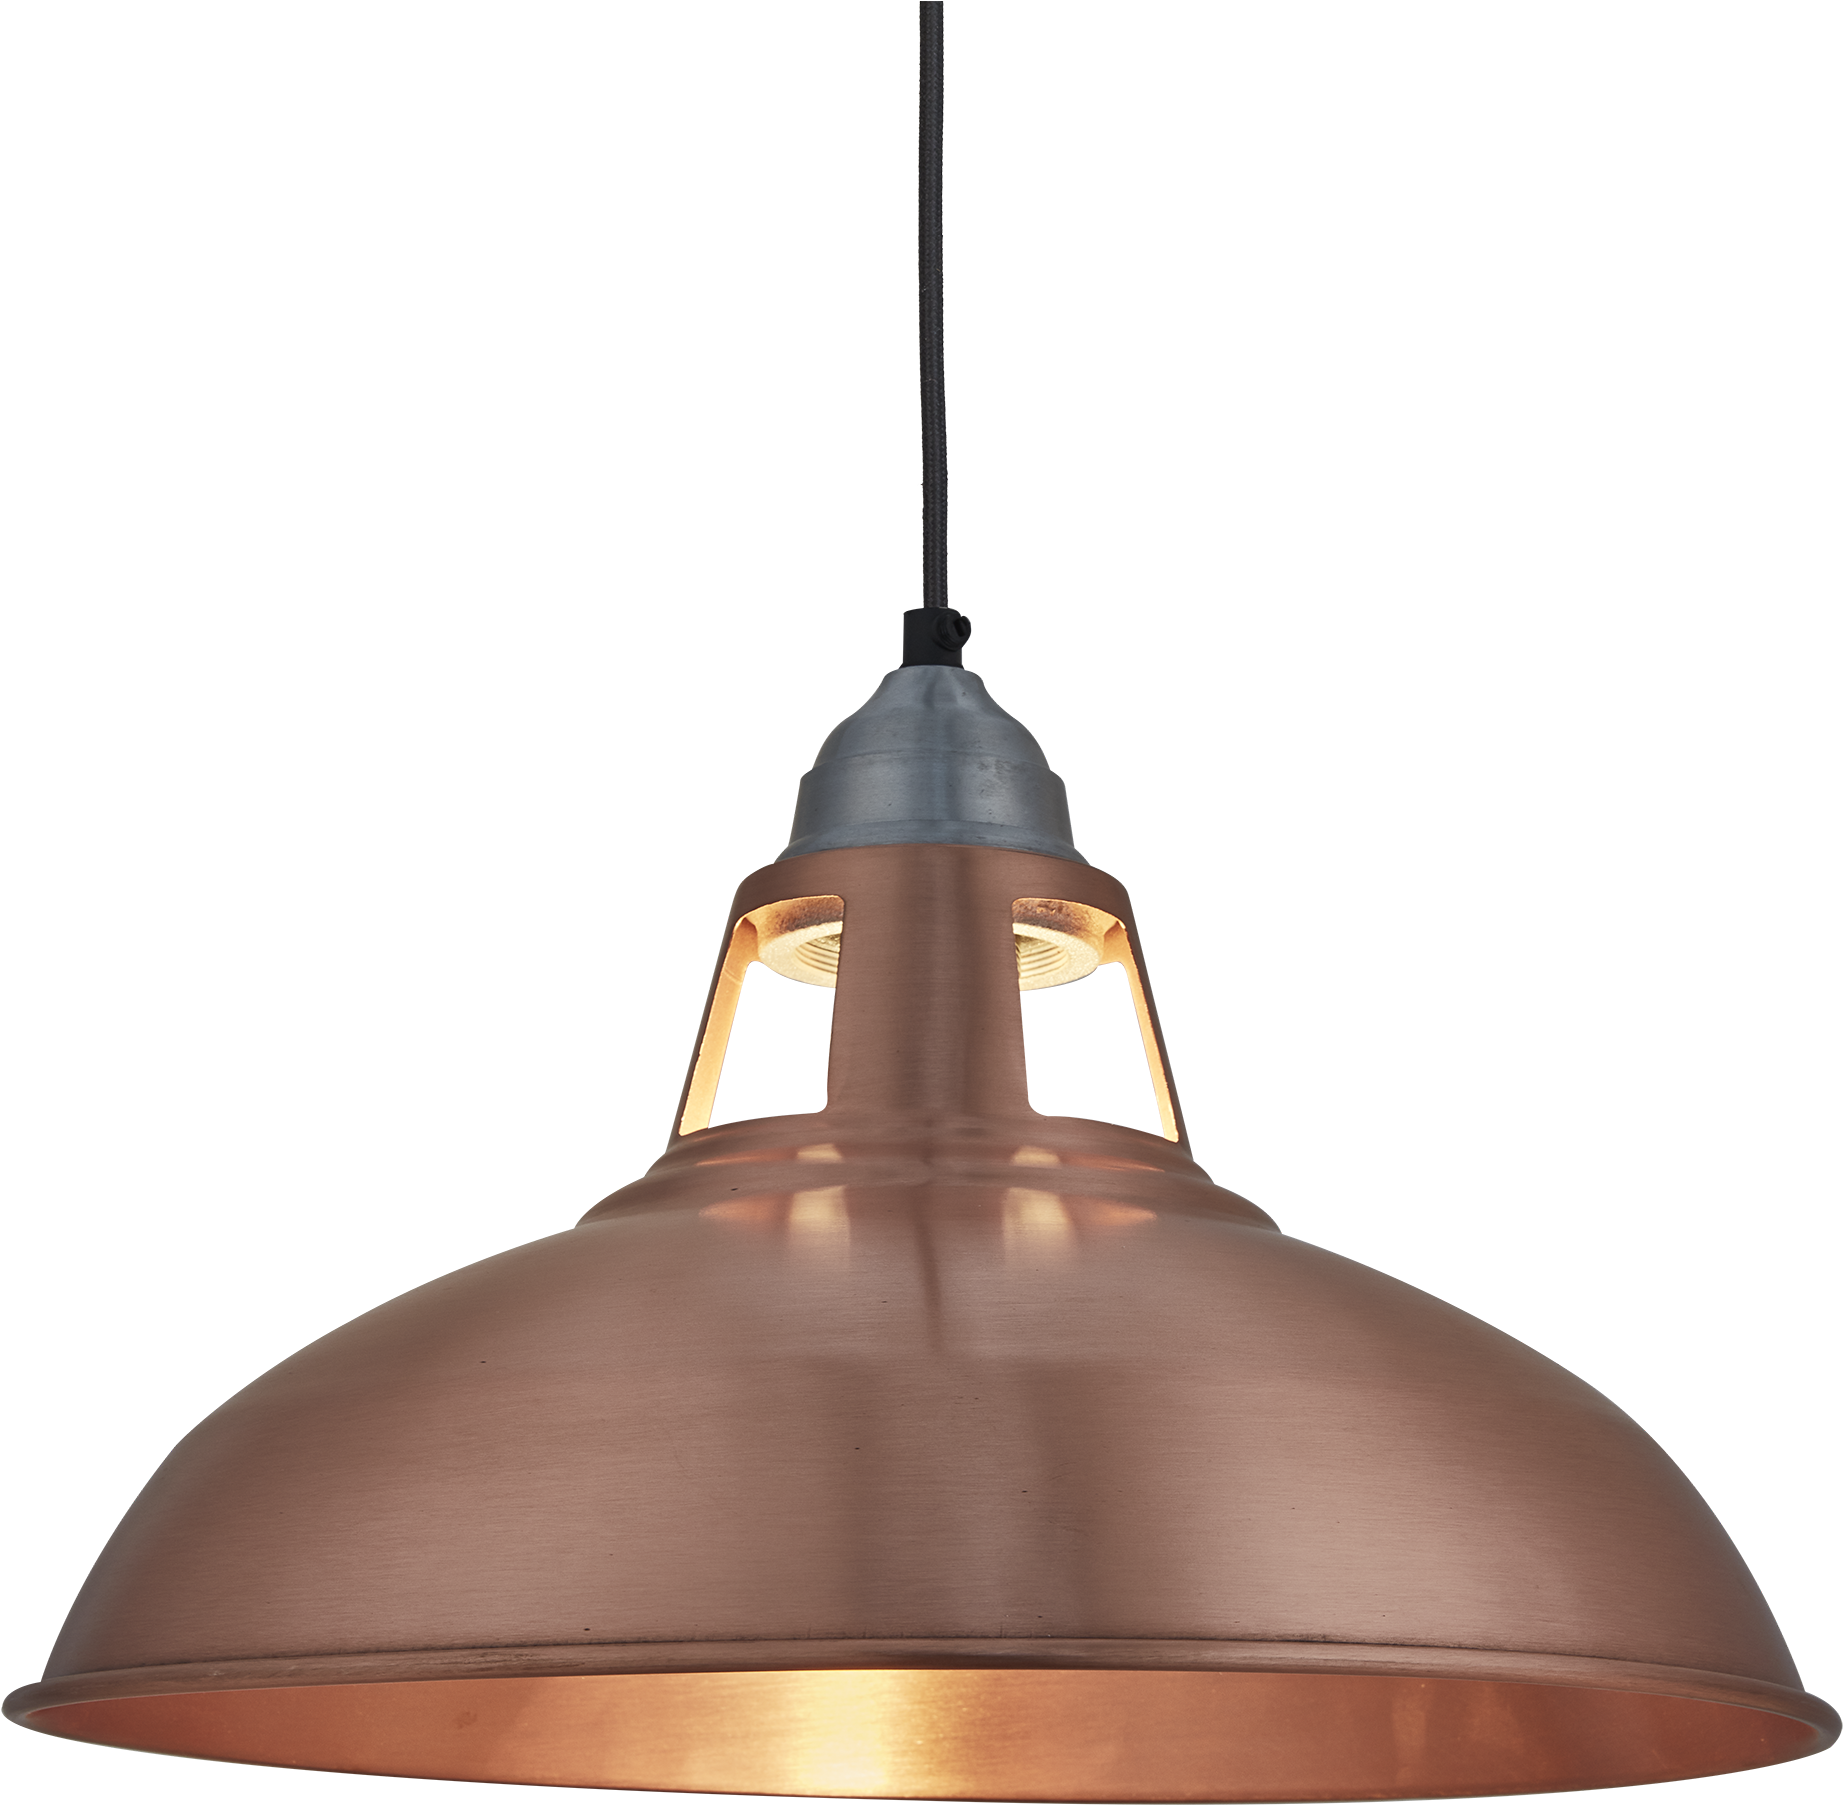 A Copper Pendant Light With A Black Background